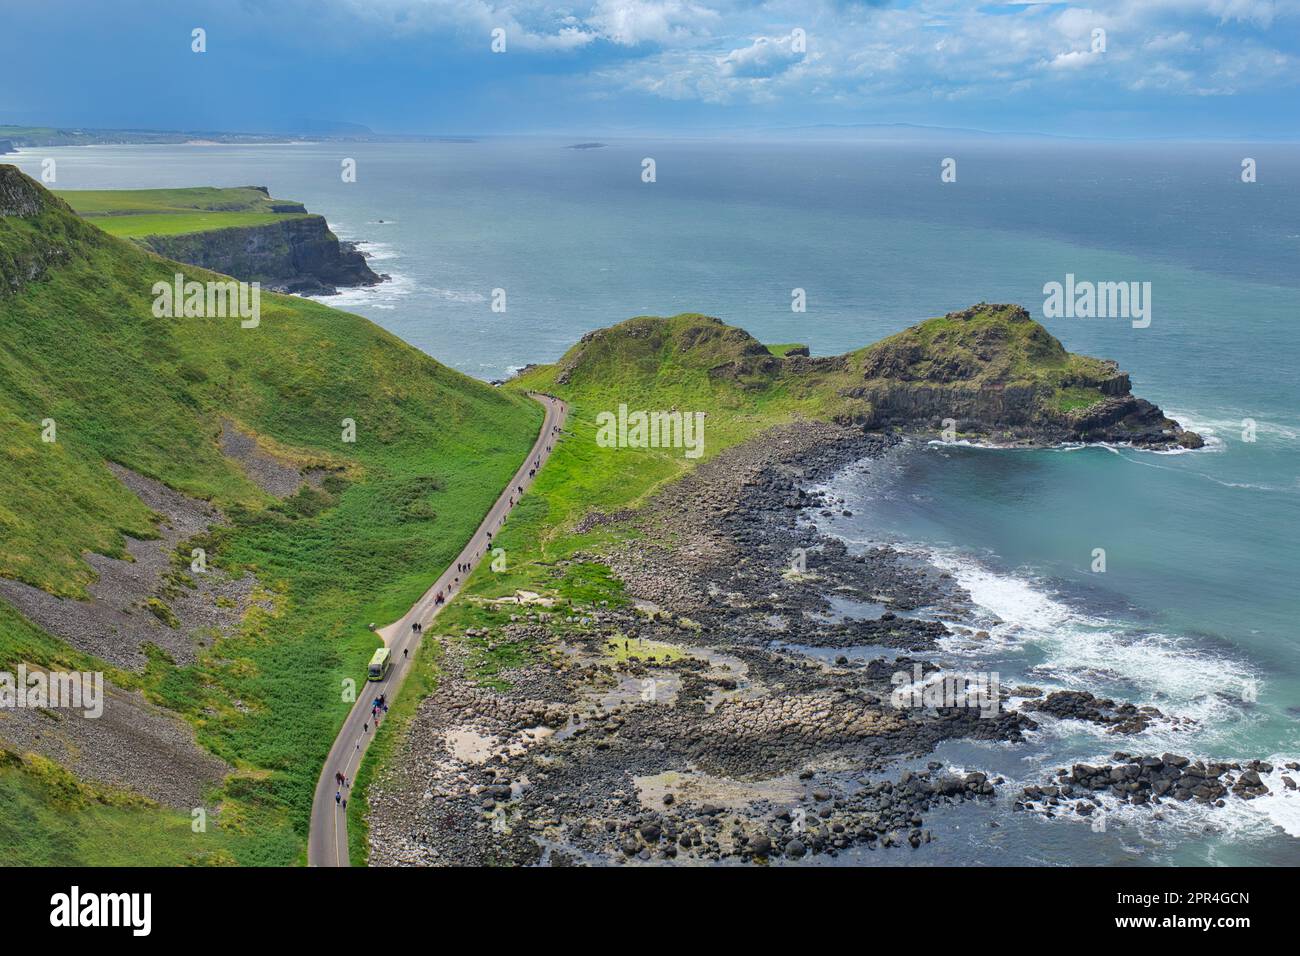 A bird's-eye Aerial view of a bus and a pedestrian path to the Giant's Causeway, with ocean view and blue sky in Northern Ireland, UK. Stock Photo